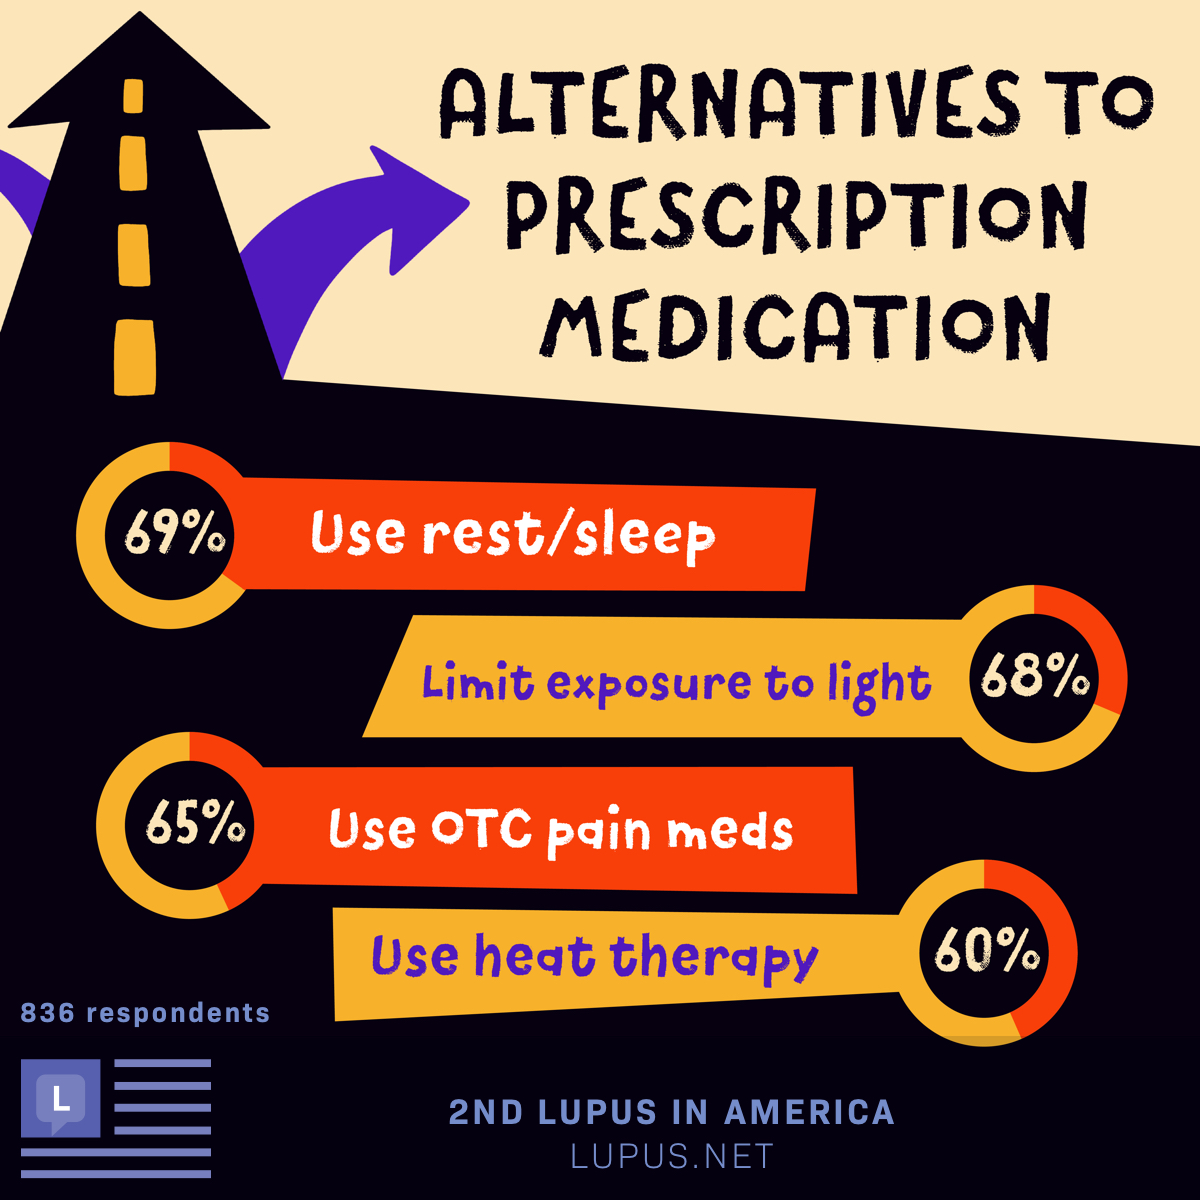 Alternatives to prescriptions include rest/sleep, limited sun exposure, OTC pain medication, and heat therapy. 